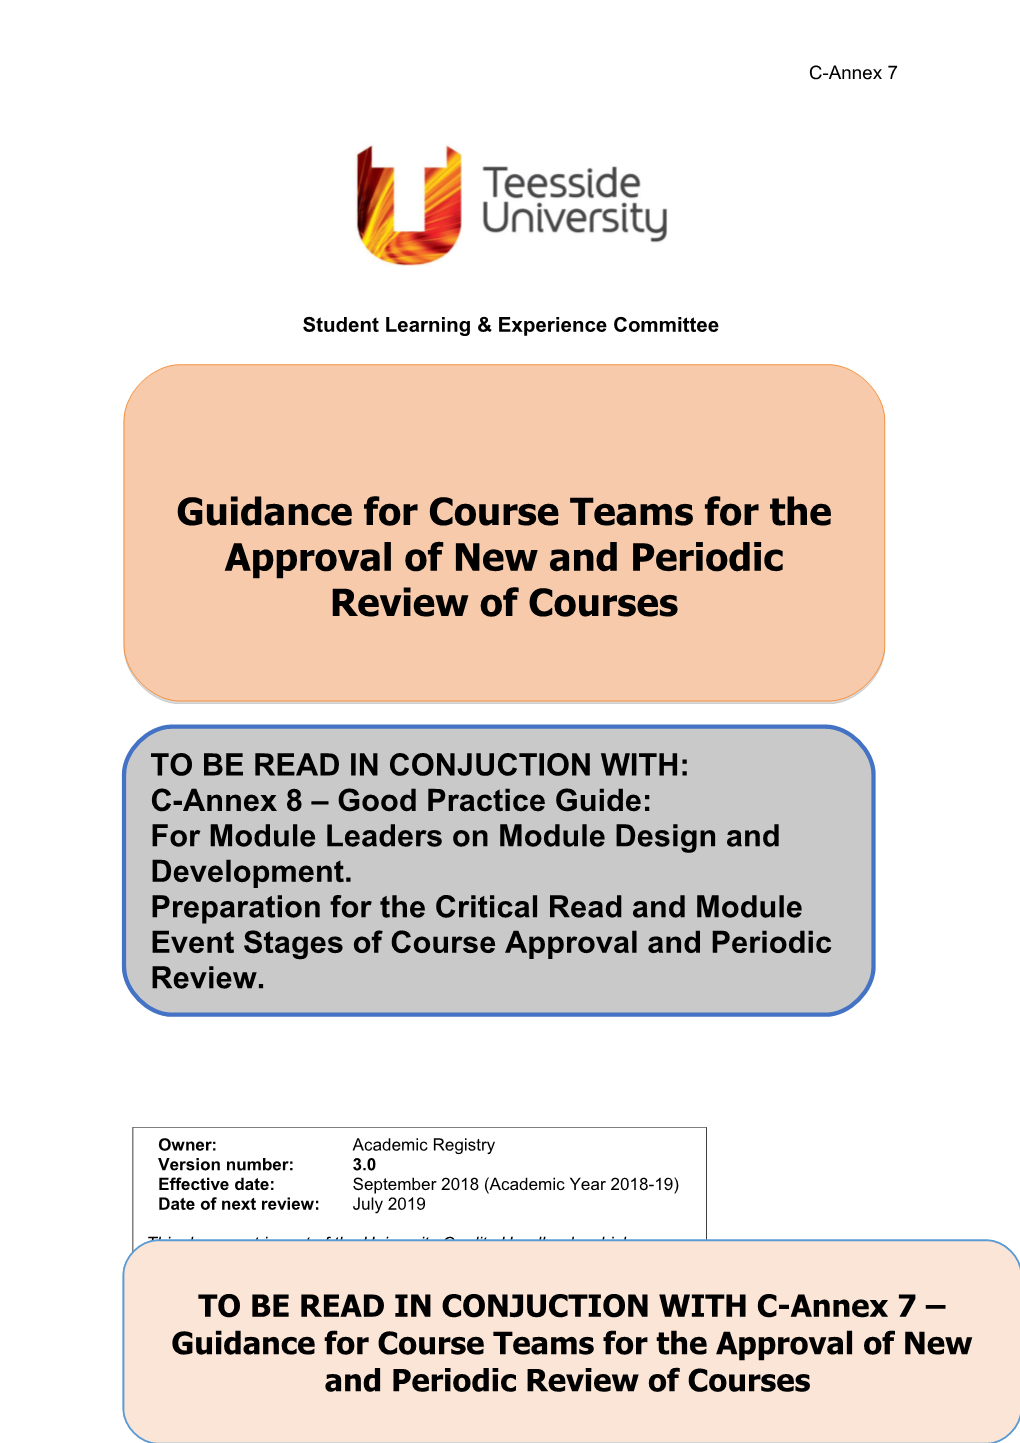 2.THE FORMAT of the COURSE APPROVAL/Periodic REVIEW EVENT